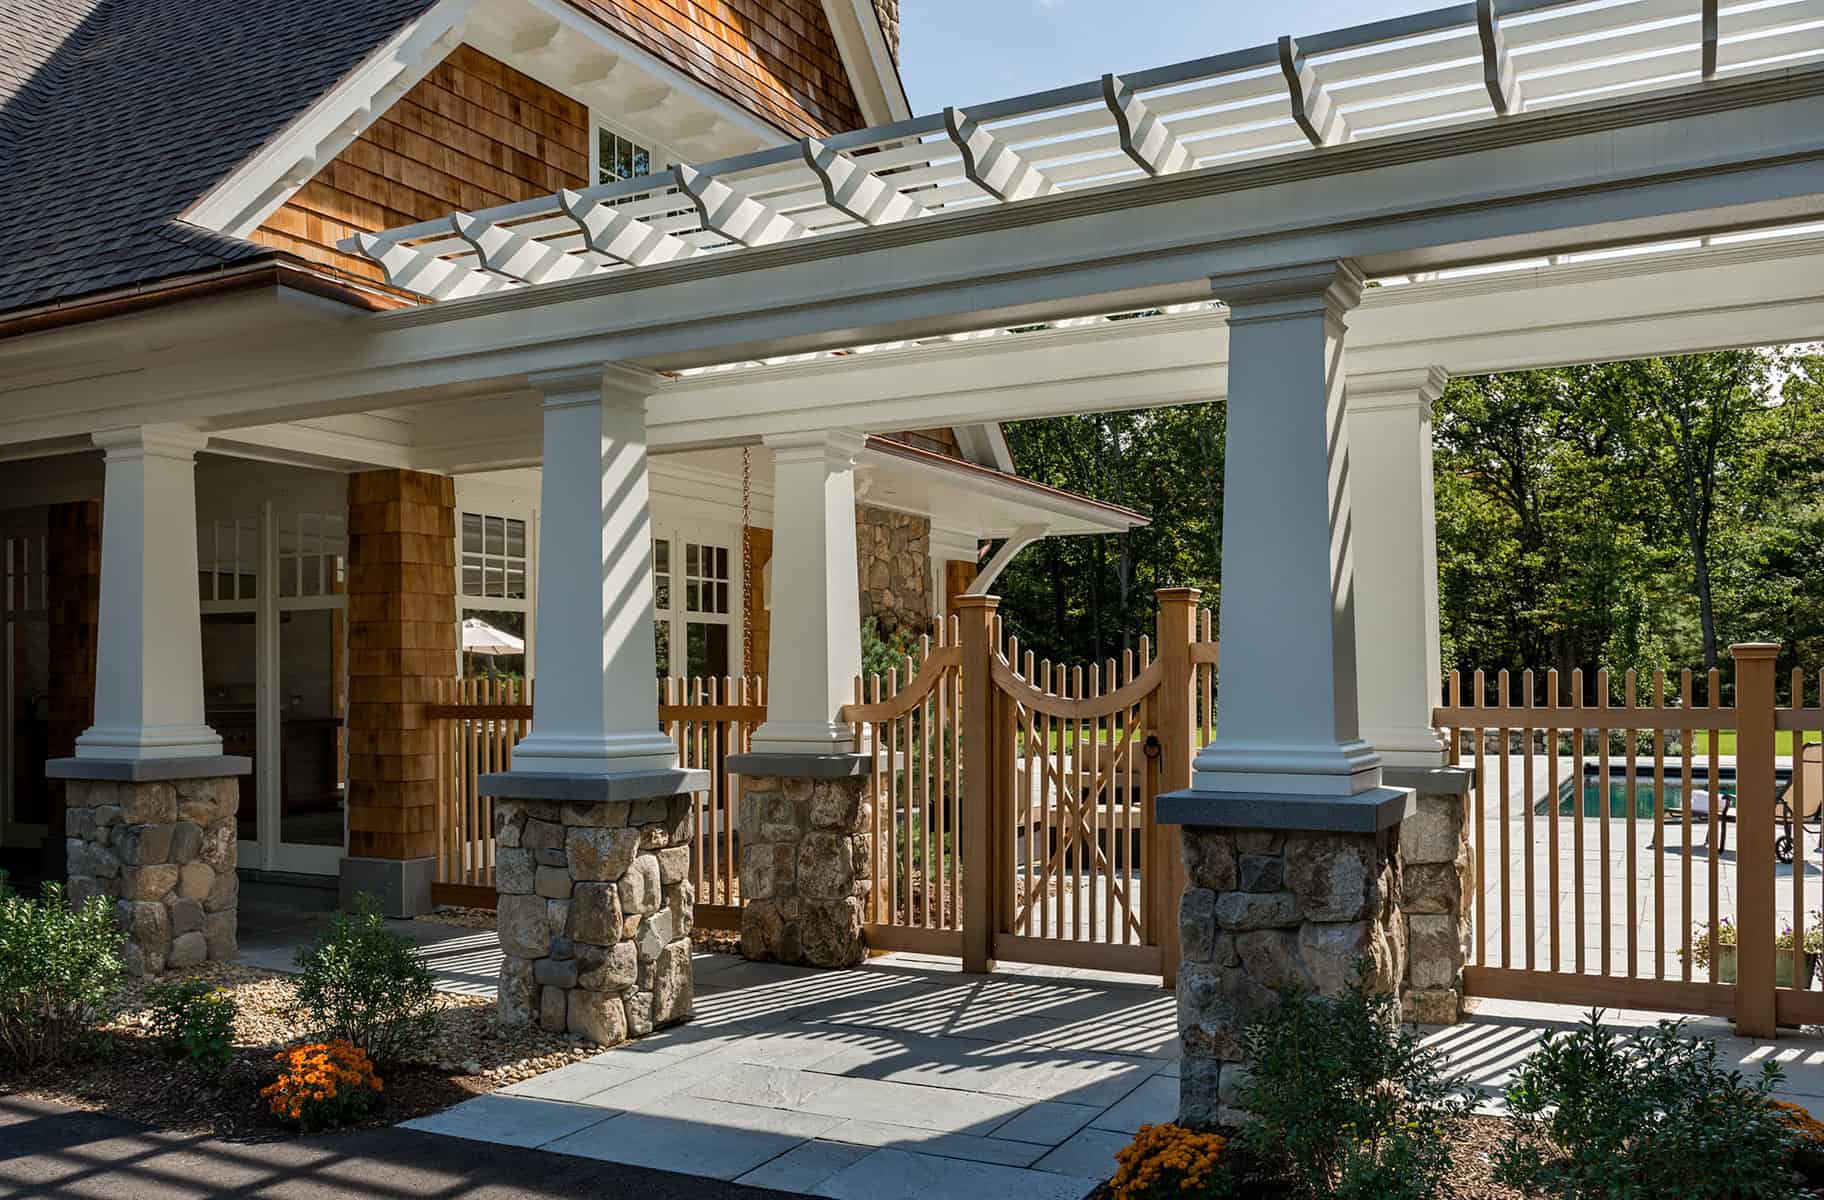 Pergola connects the pool house to the main house.